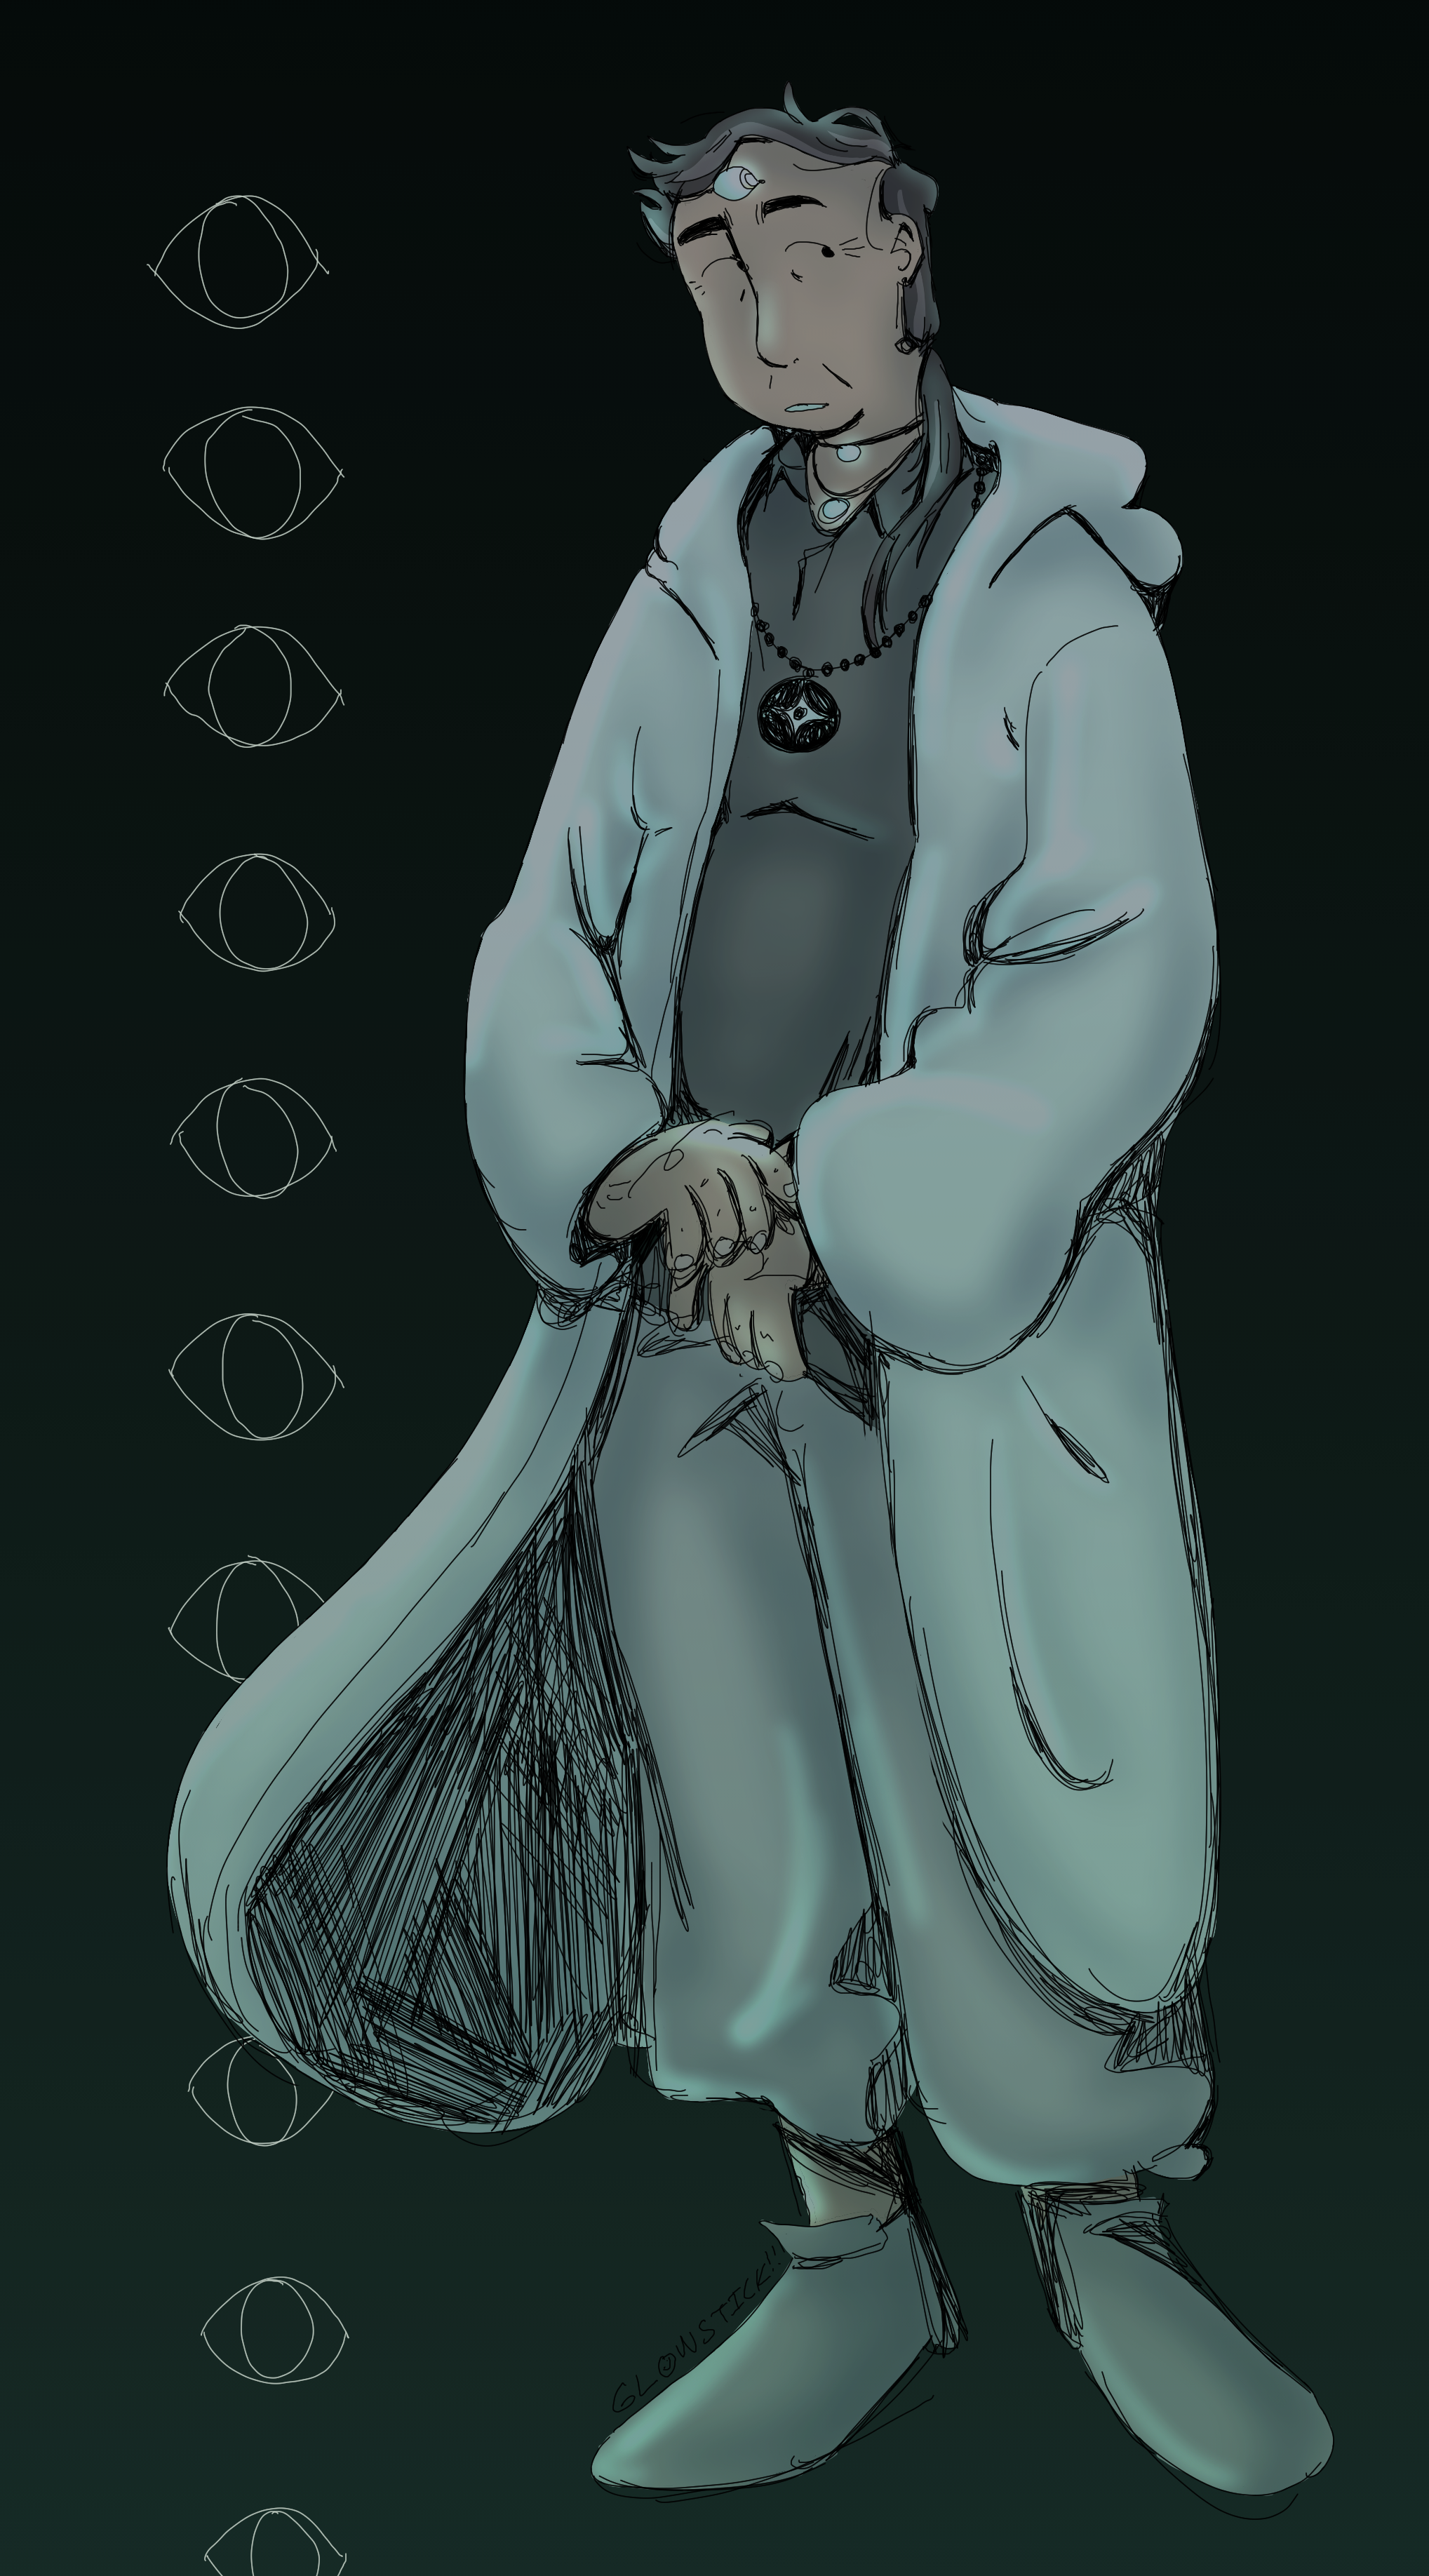 A digital drawing of Graham, a lightskinned middle aged man with a third eye. He's wearing a grey shirt, sweatpants, and a long fur coat, along with several necklaces. He is standing with a nervous expression, and the background is dark and have a vertical line of cartoonish eyes.